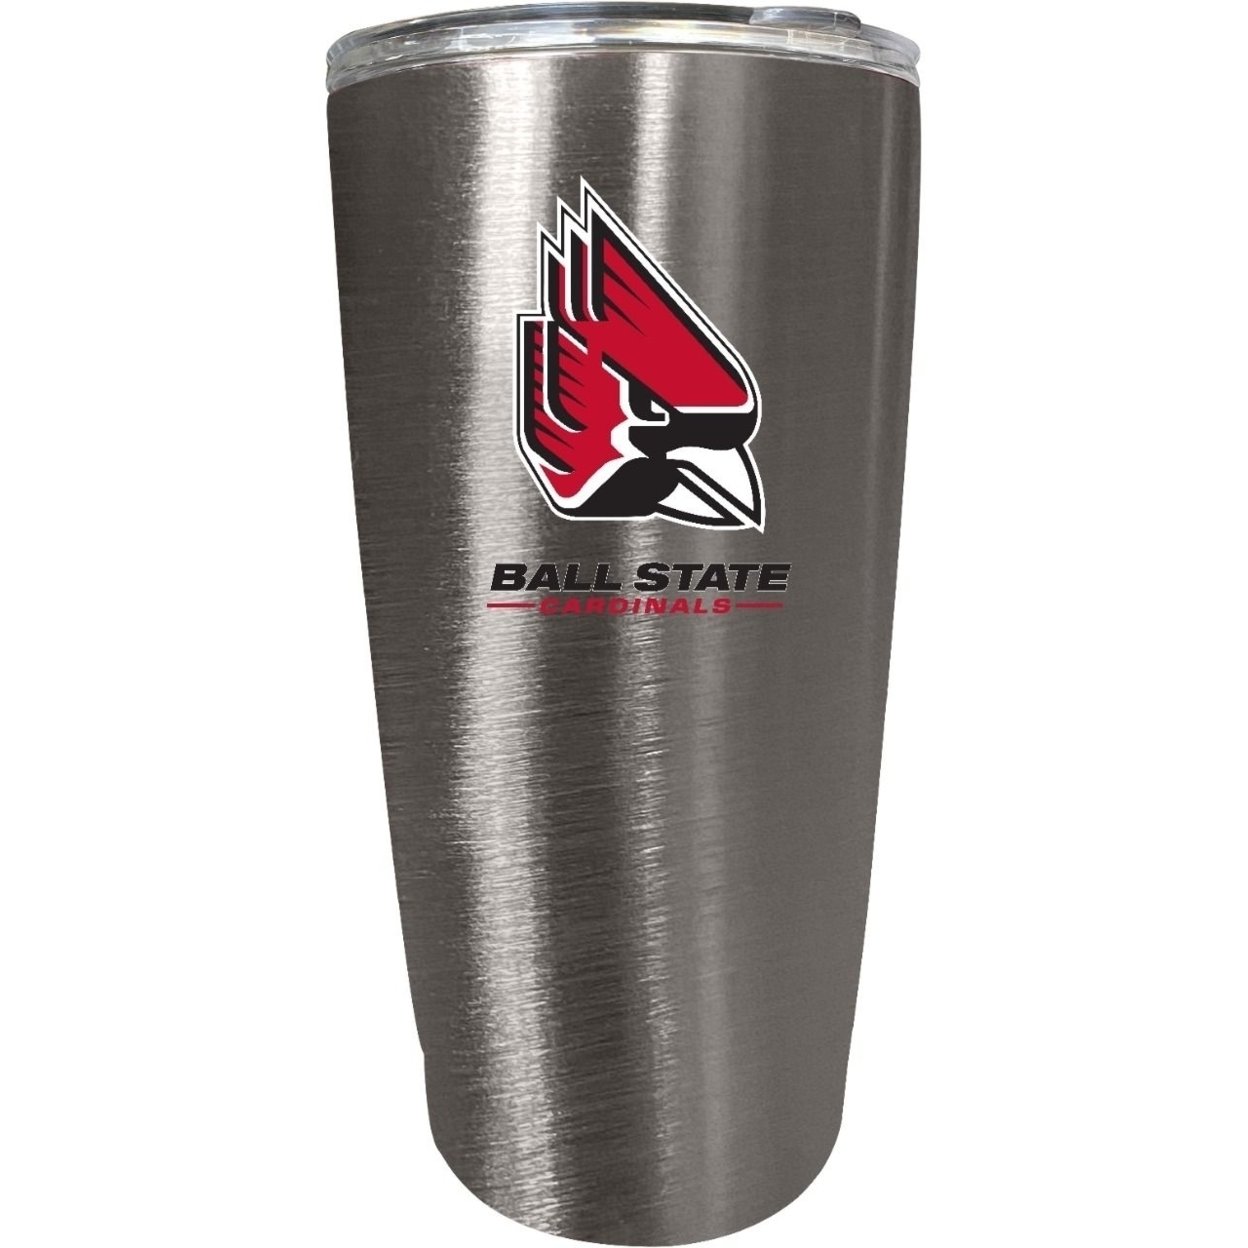 Ball State University 16 Oz Insulated Stainless Steel Tumbler Colorless